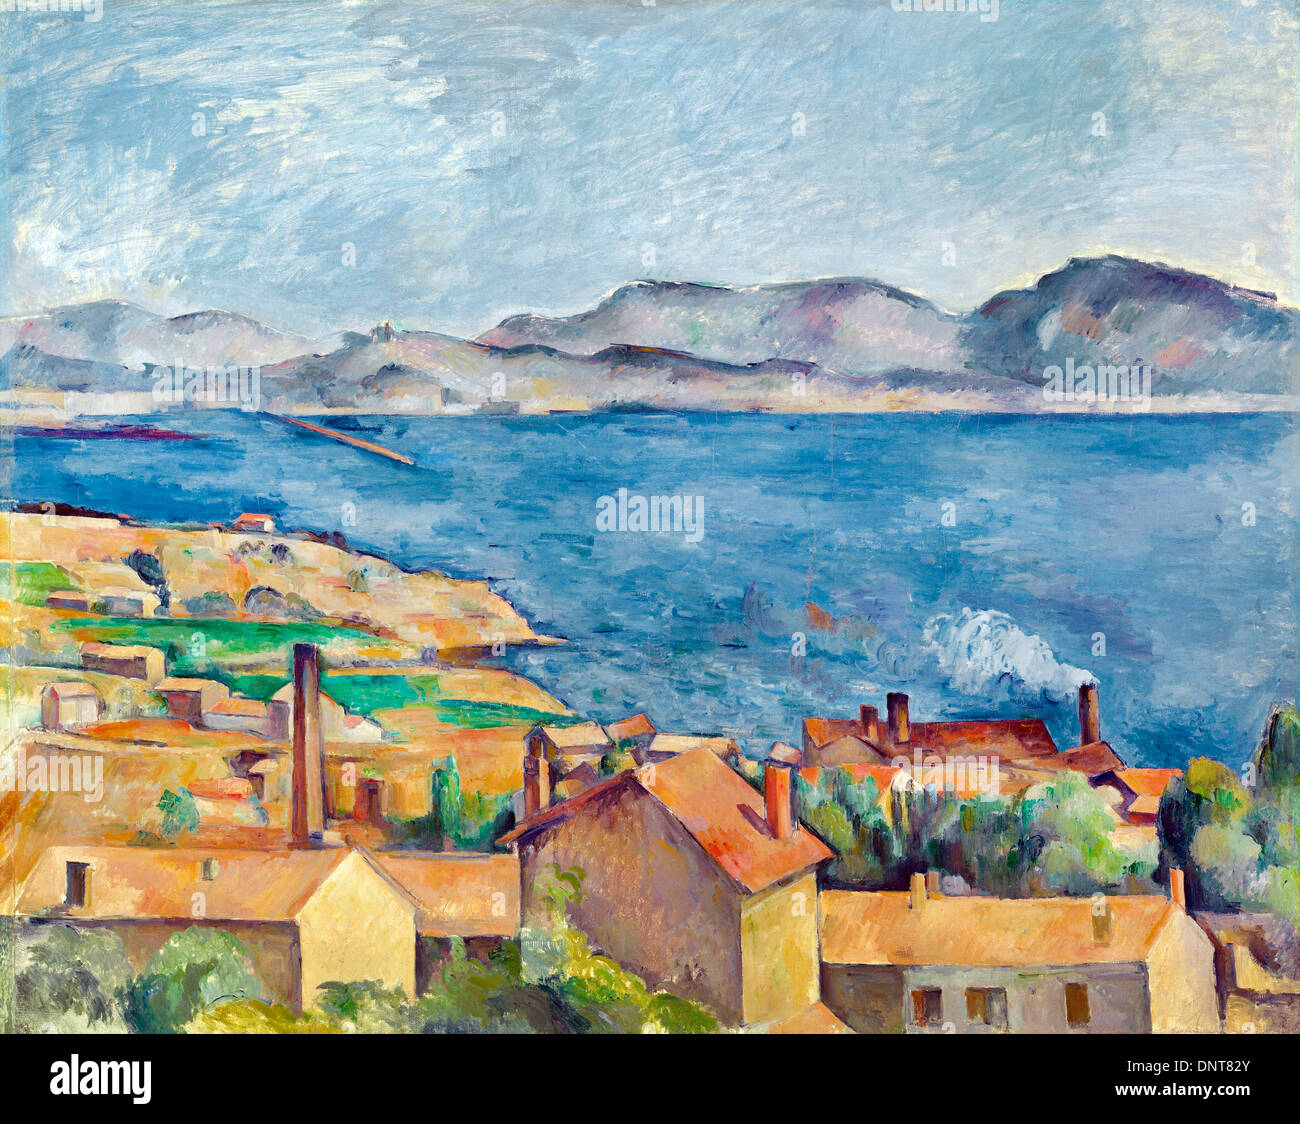 Paul Cezanne, The Bay of Marseilles, Seen from L'Estaque. Circa 1885. Oil on canvas. Art Institute of Chicago, Chicago, USA. Stock Photo